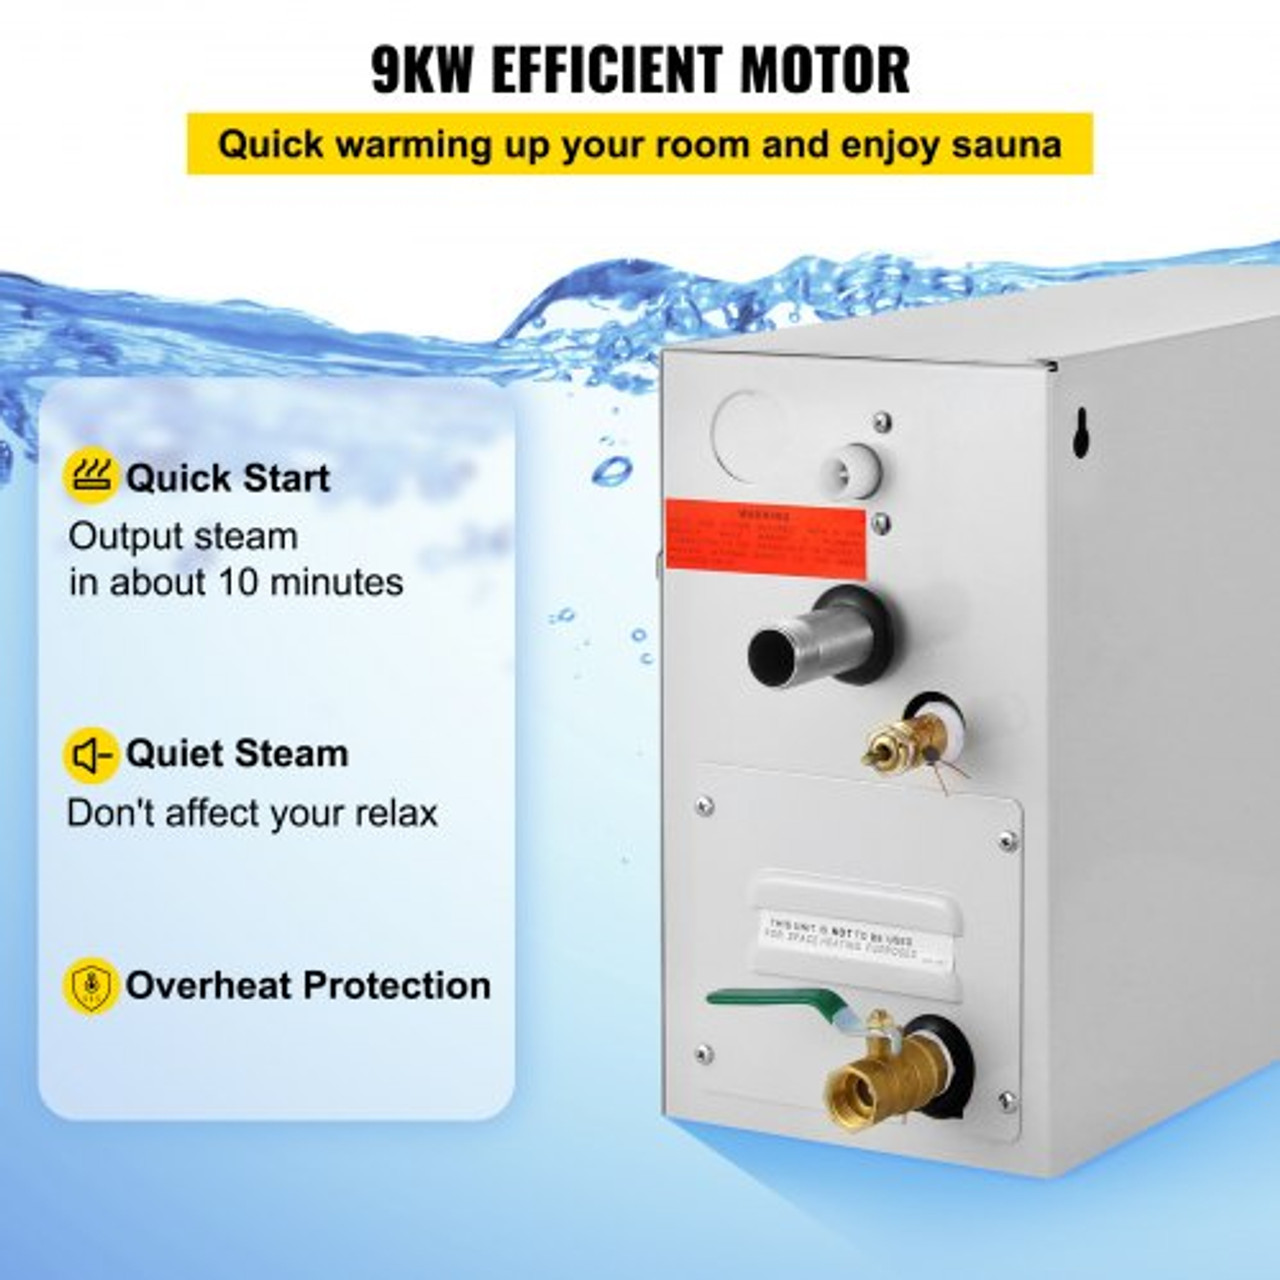 Steam Generator 9KW Steam Showers 220V-240V Sauna Steam Generator with Programmable Controller for Home SPA Bathroom Hotel Shower Steam(Controller Not Contain Battery)